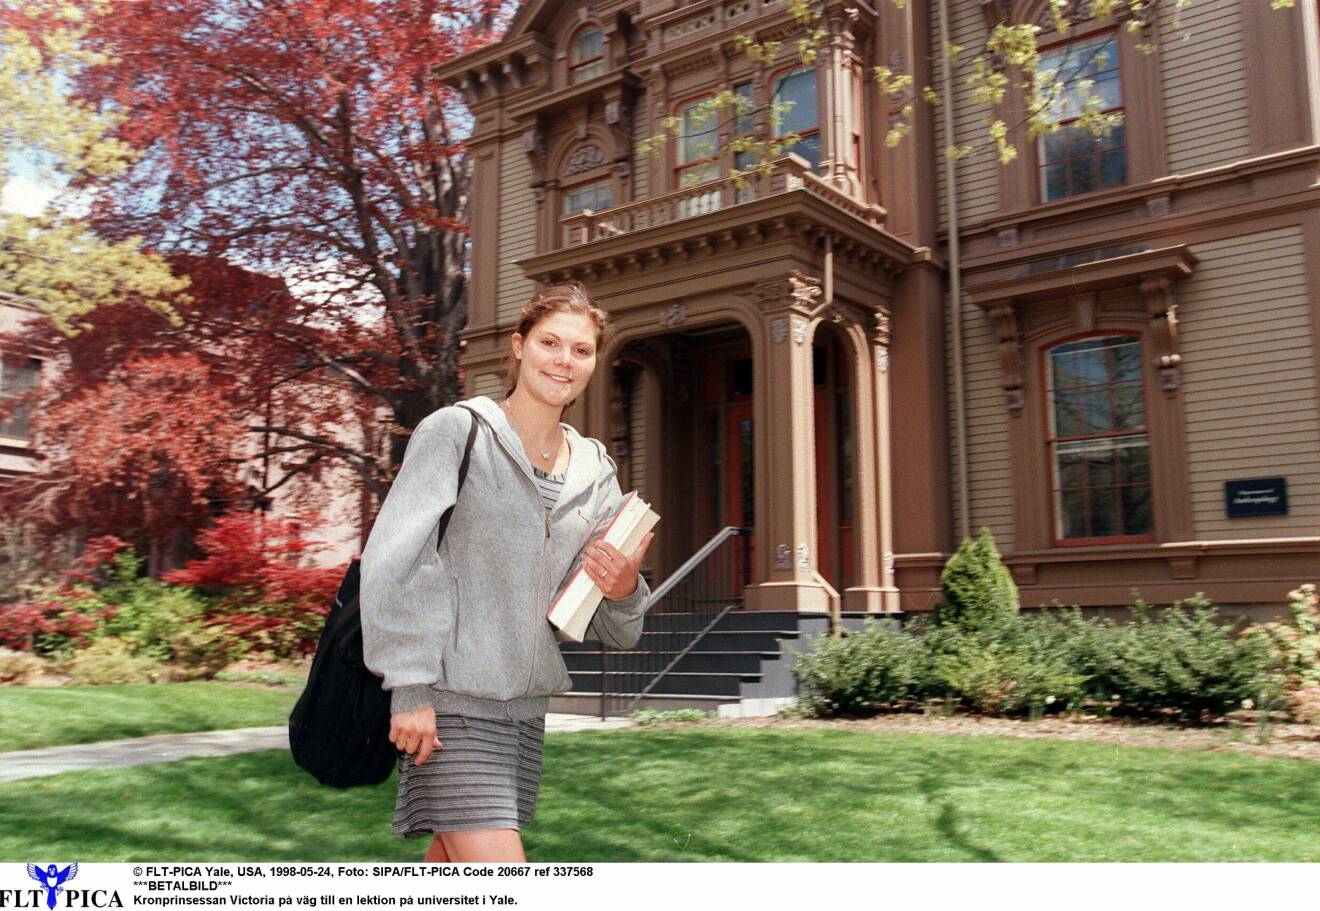 Crown Princess Victoria as a young girl on her way to a class at Yale University